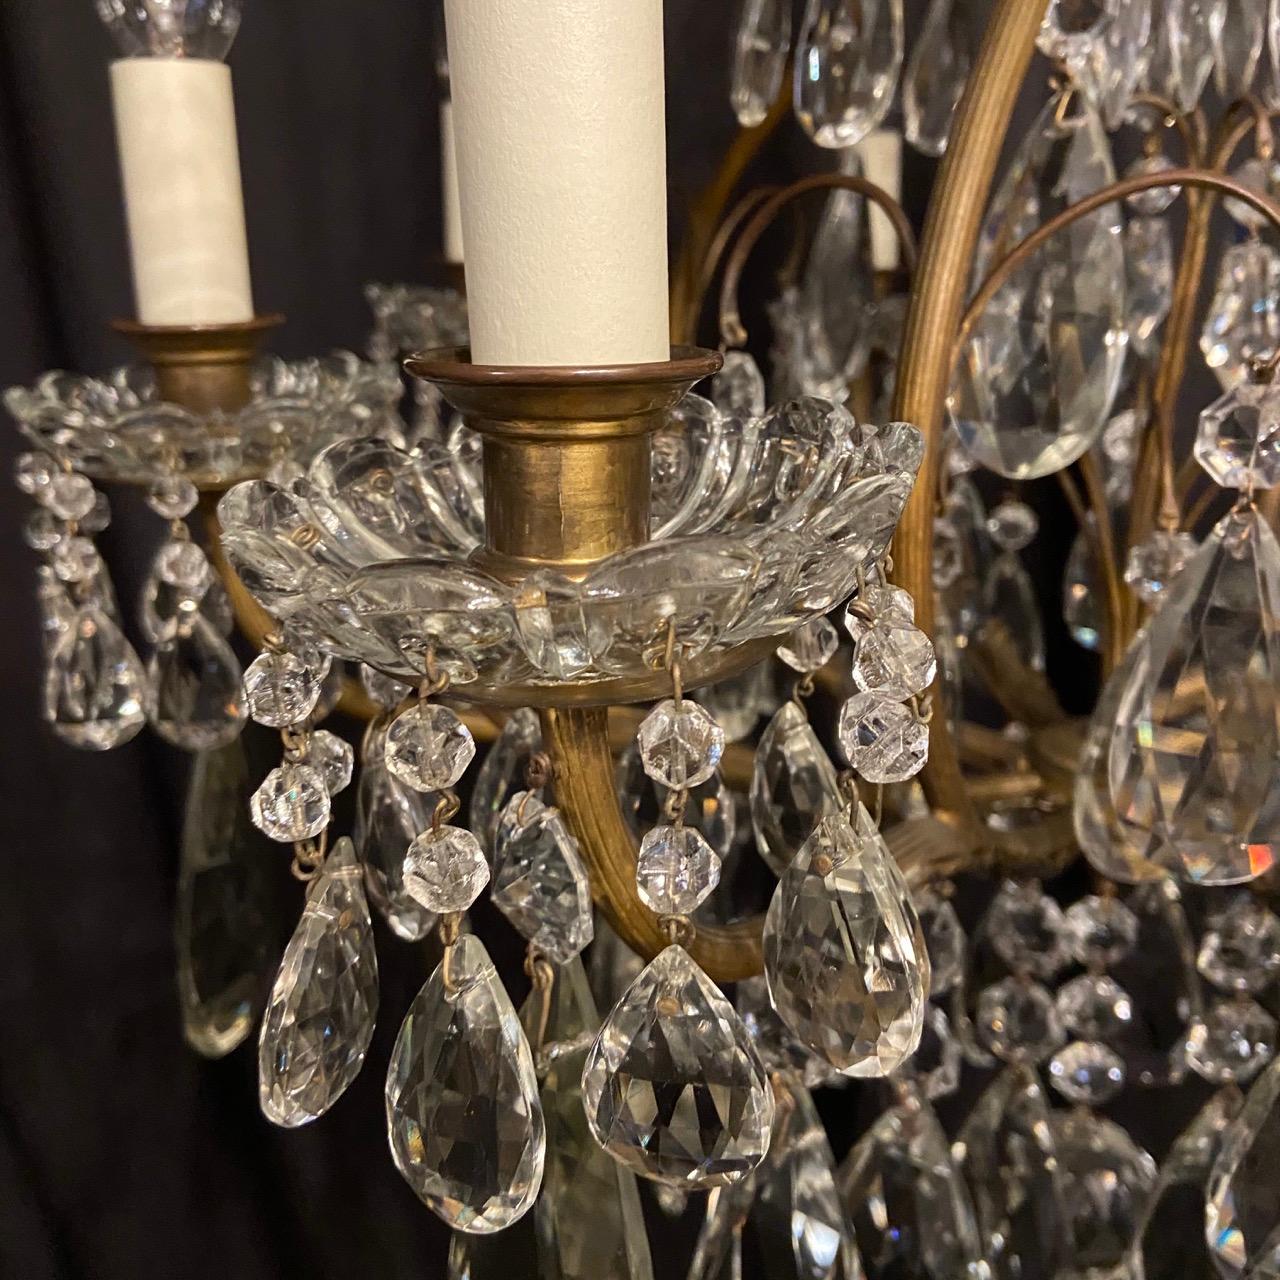 A French gilded brass and crystal 9-light birdcage form antique chandelier, the 8 reeded scrolling arms with glass bobeche drip pans and candle sconces, issuing from a foliated cage form interior with a single inverted light fitting and wirework